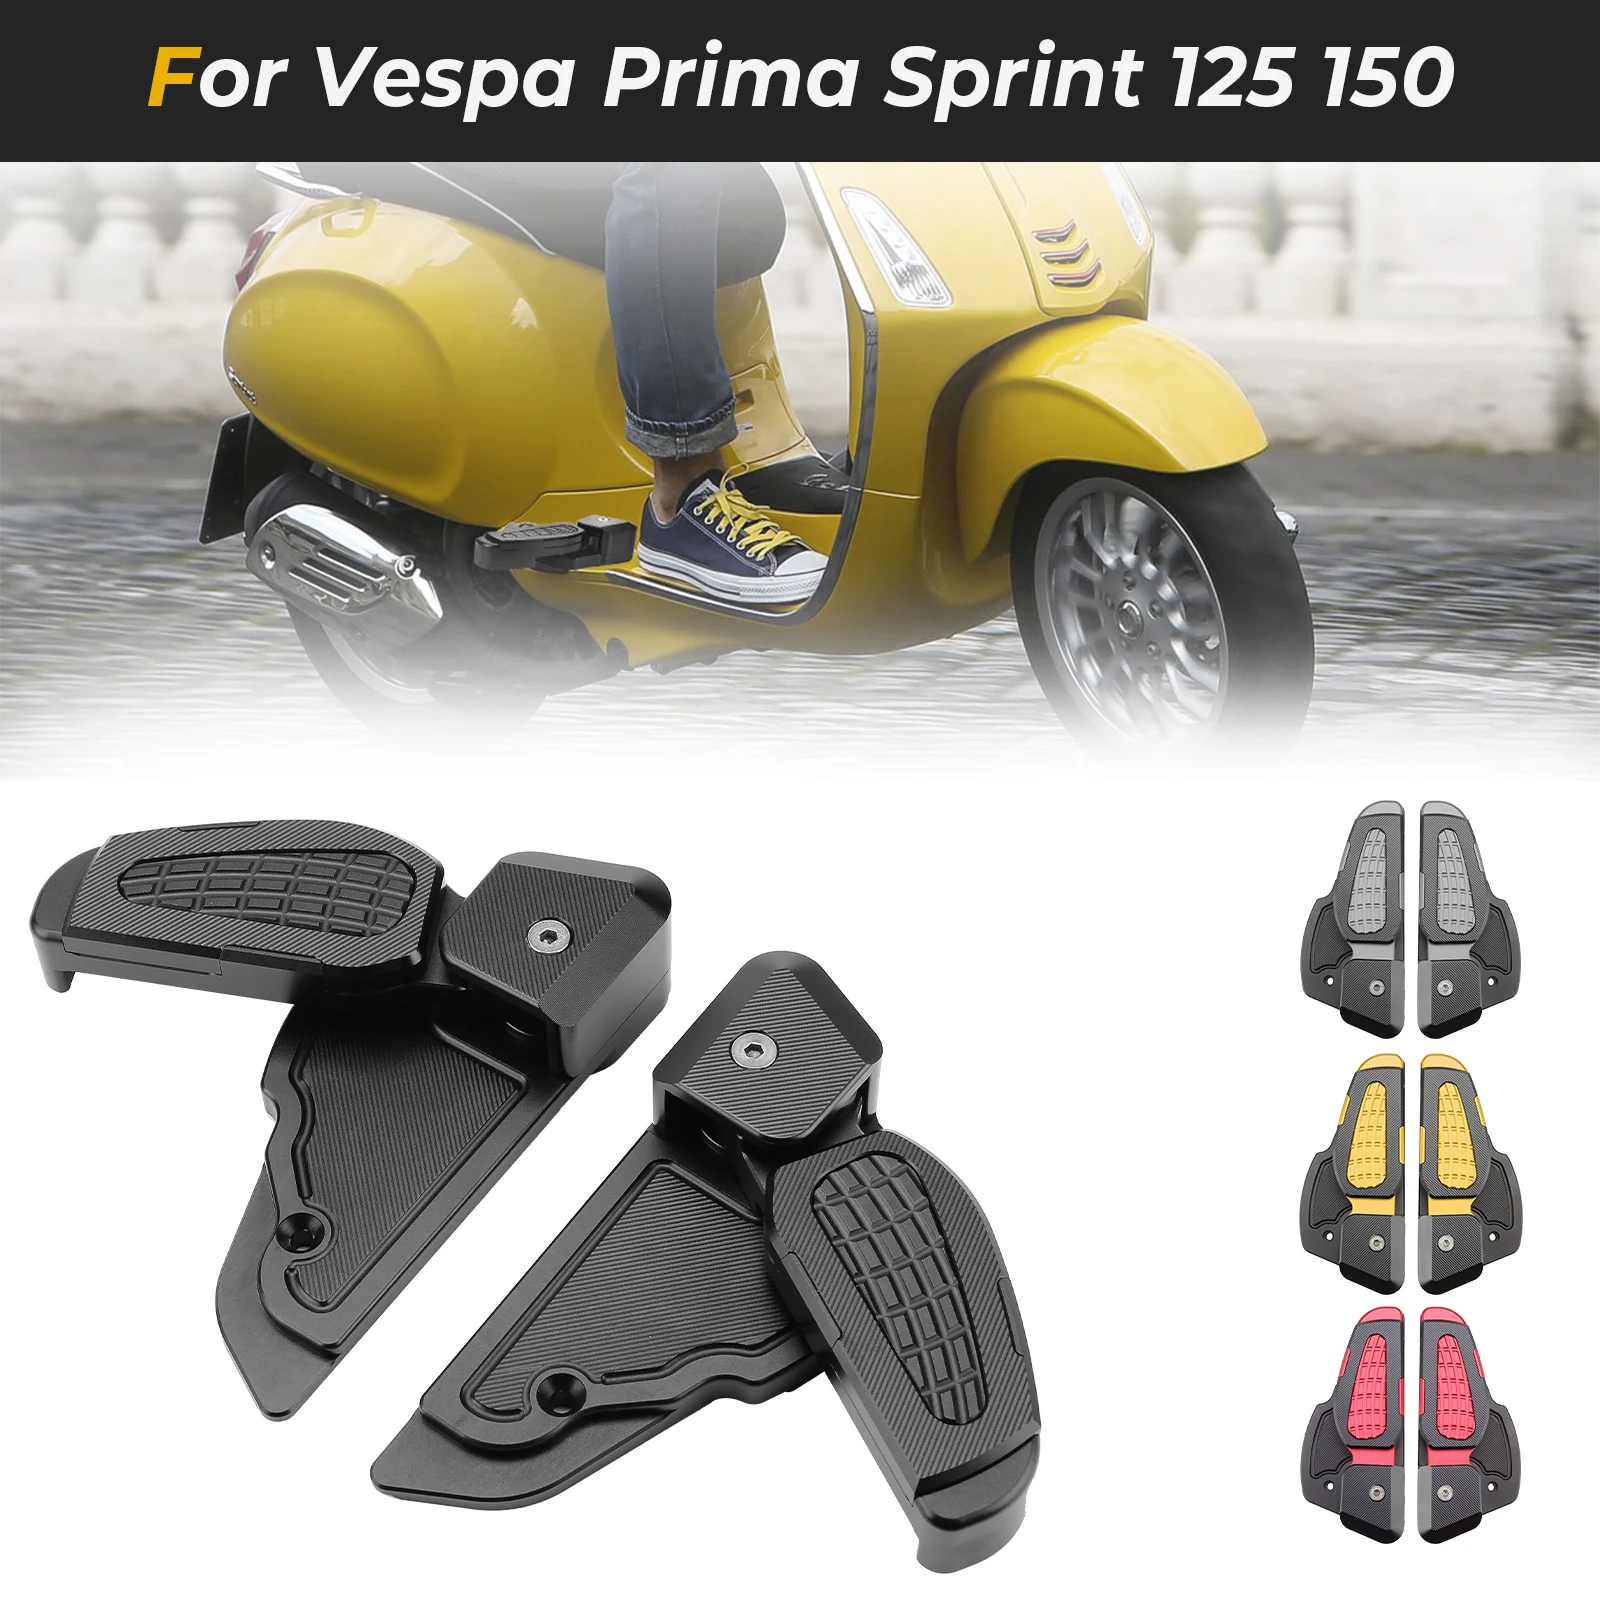 

Footpegs Motorcycle Rear Footrest For Vespa Prima 125 150 SPRINT 2017-2020 Passenger Extension Foot Pad Foot pegs Adapter